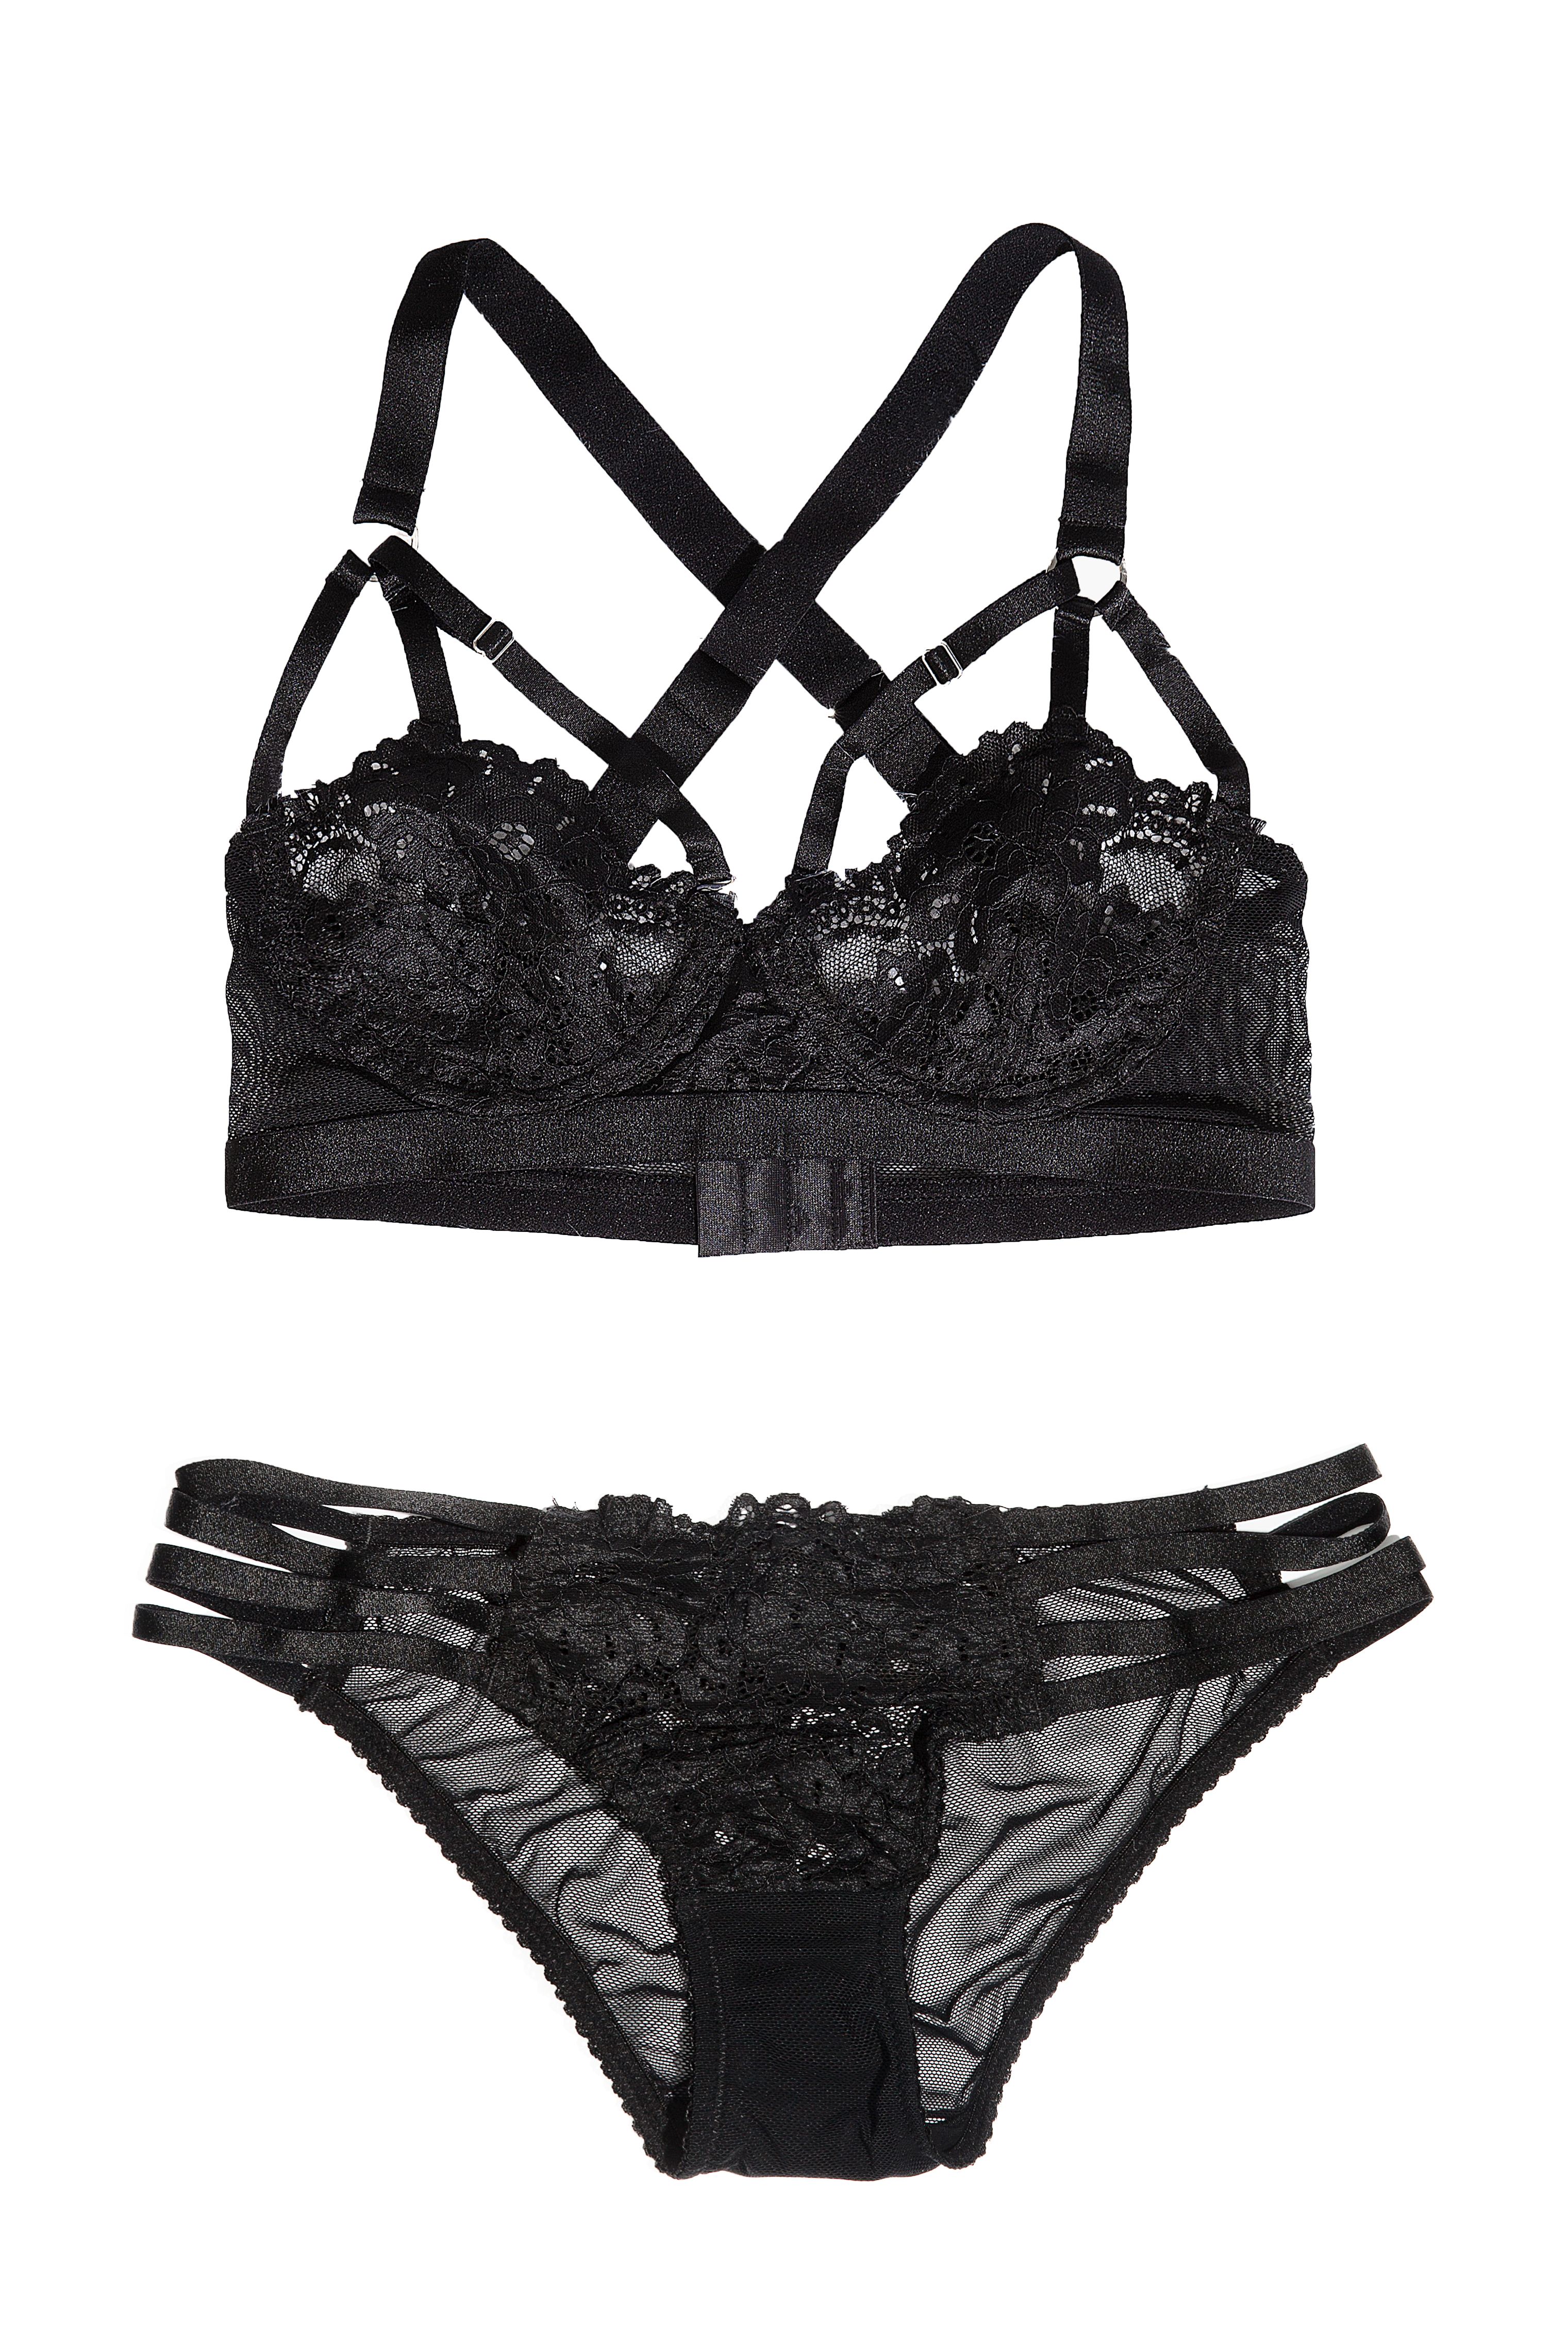 I Wore Fancy Lingerie for a Week and My Whole Life Changed